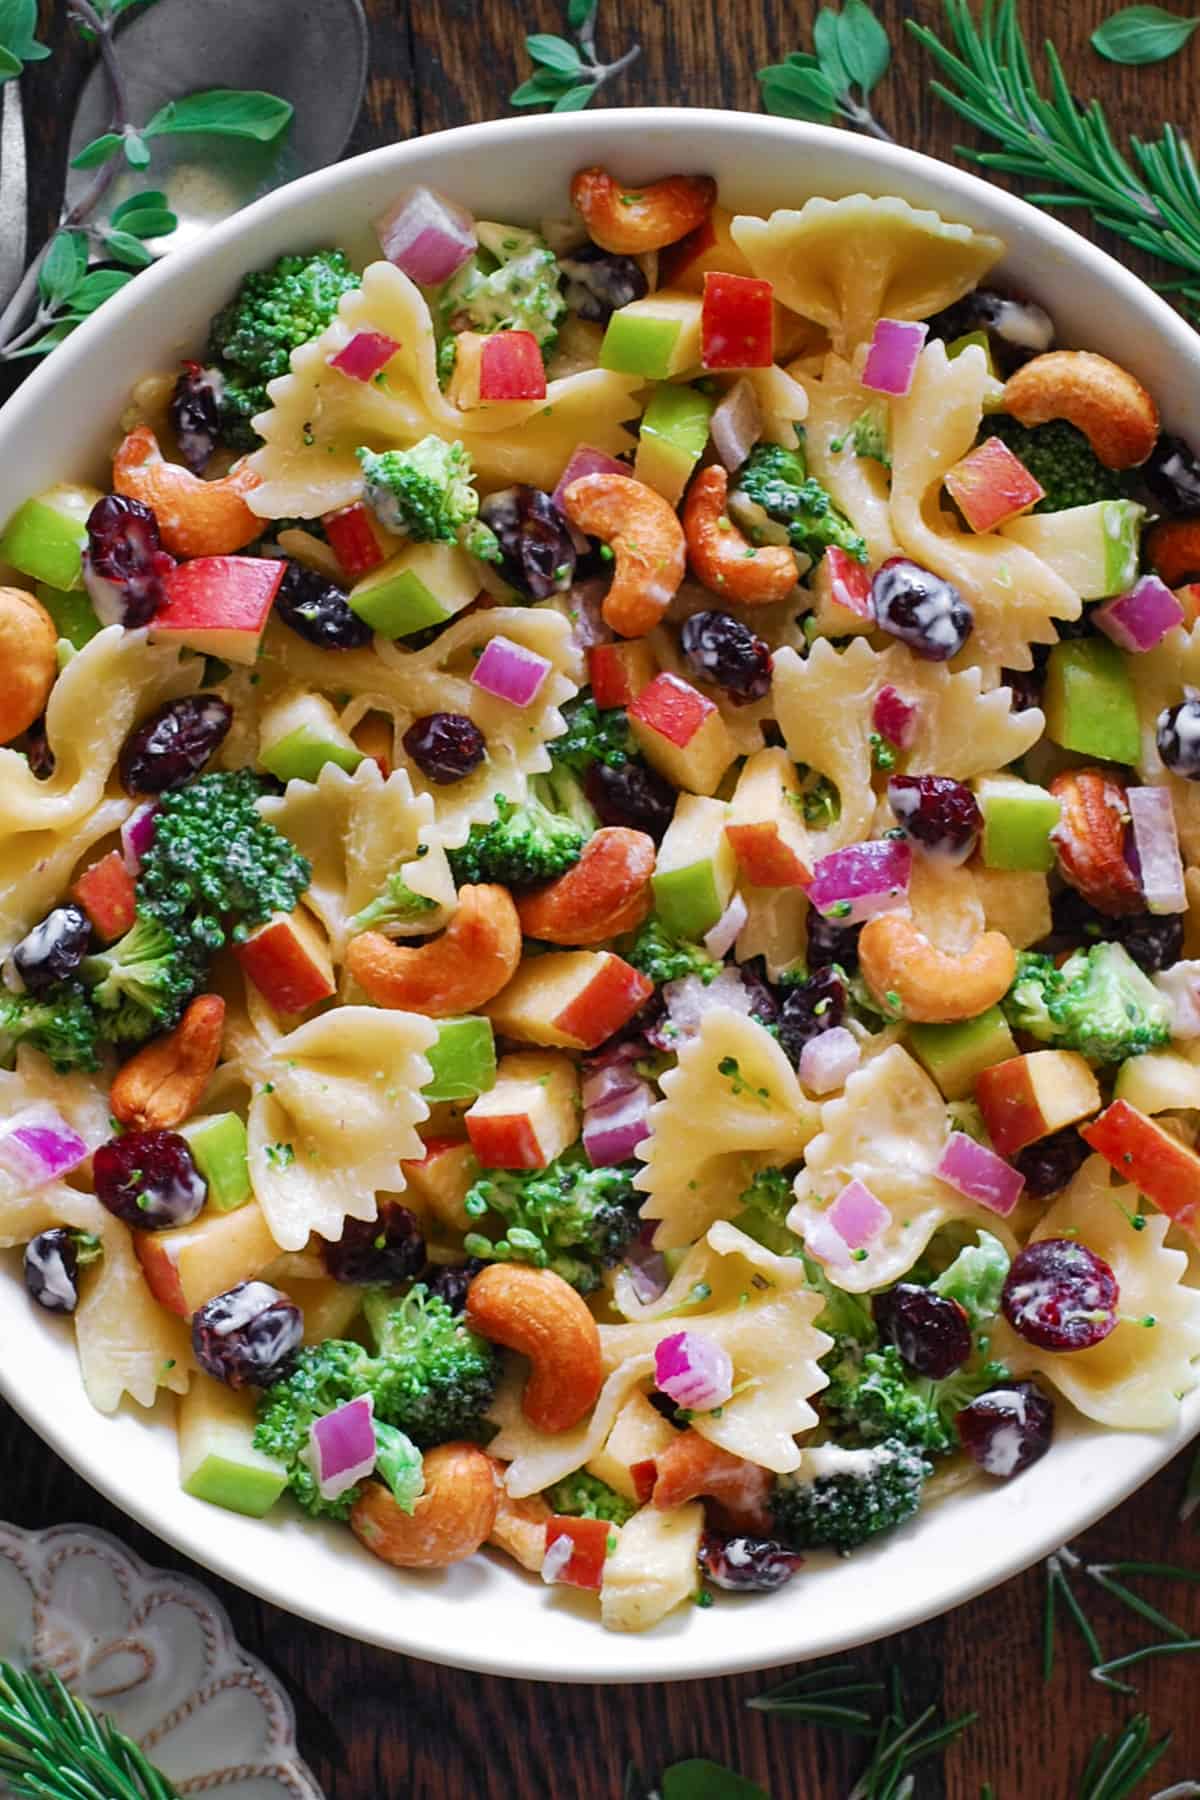 Broccoli Pasta Salad with Cranberries, Apples, Cashews, and Red Onions in a white bowl.